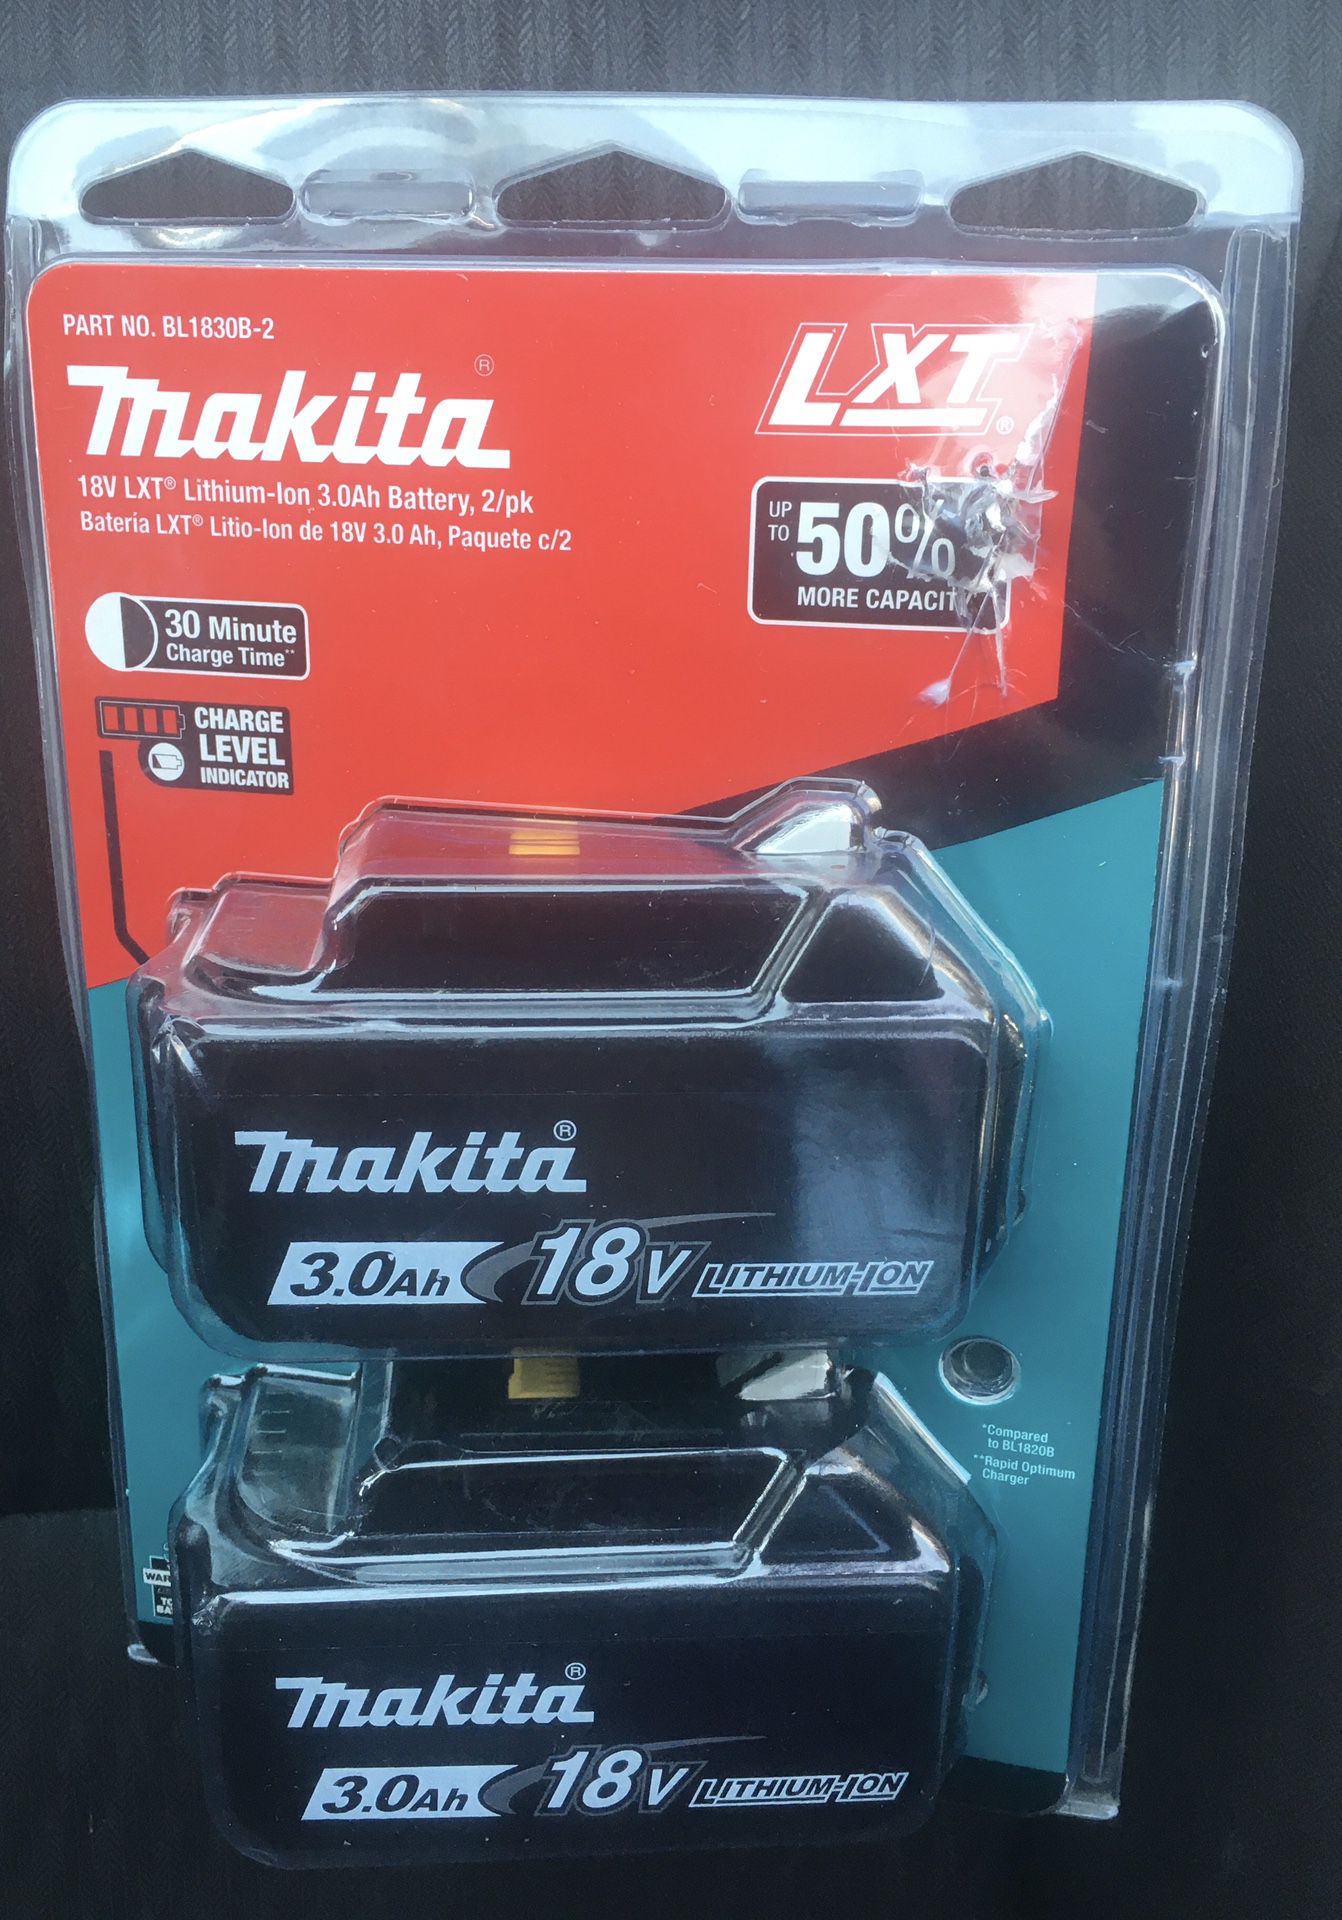 Makita 18-Volt LXT Lithium-Ion High Capacity Battery Pack 3.0Ah with Fuel Gauge (2-Pack)